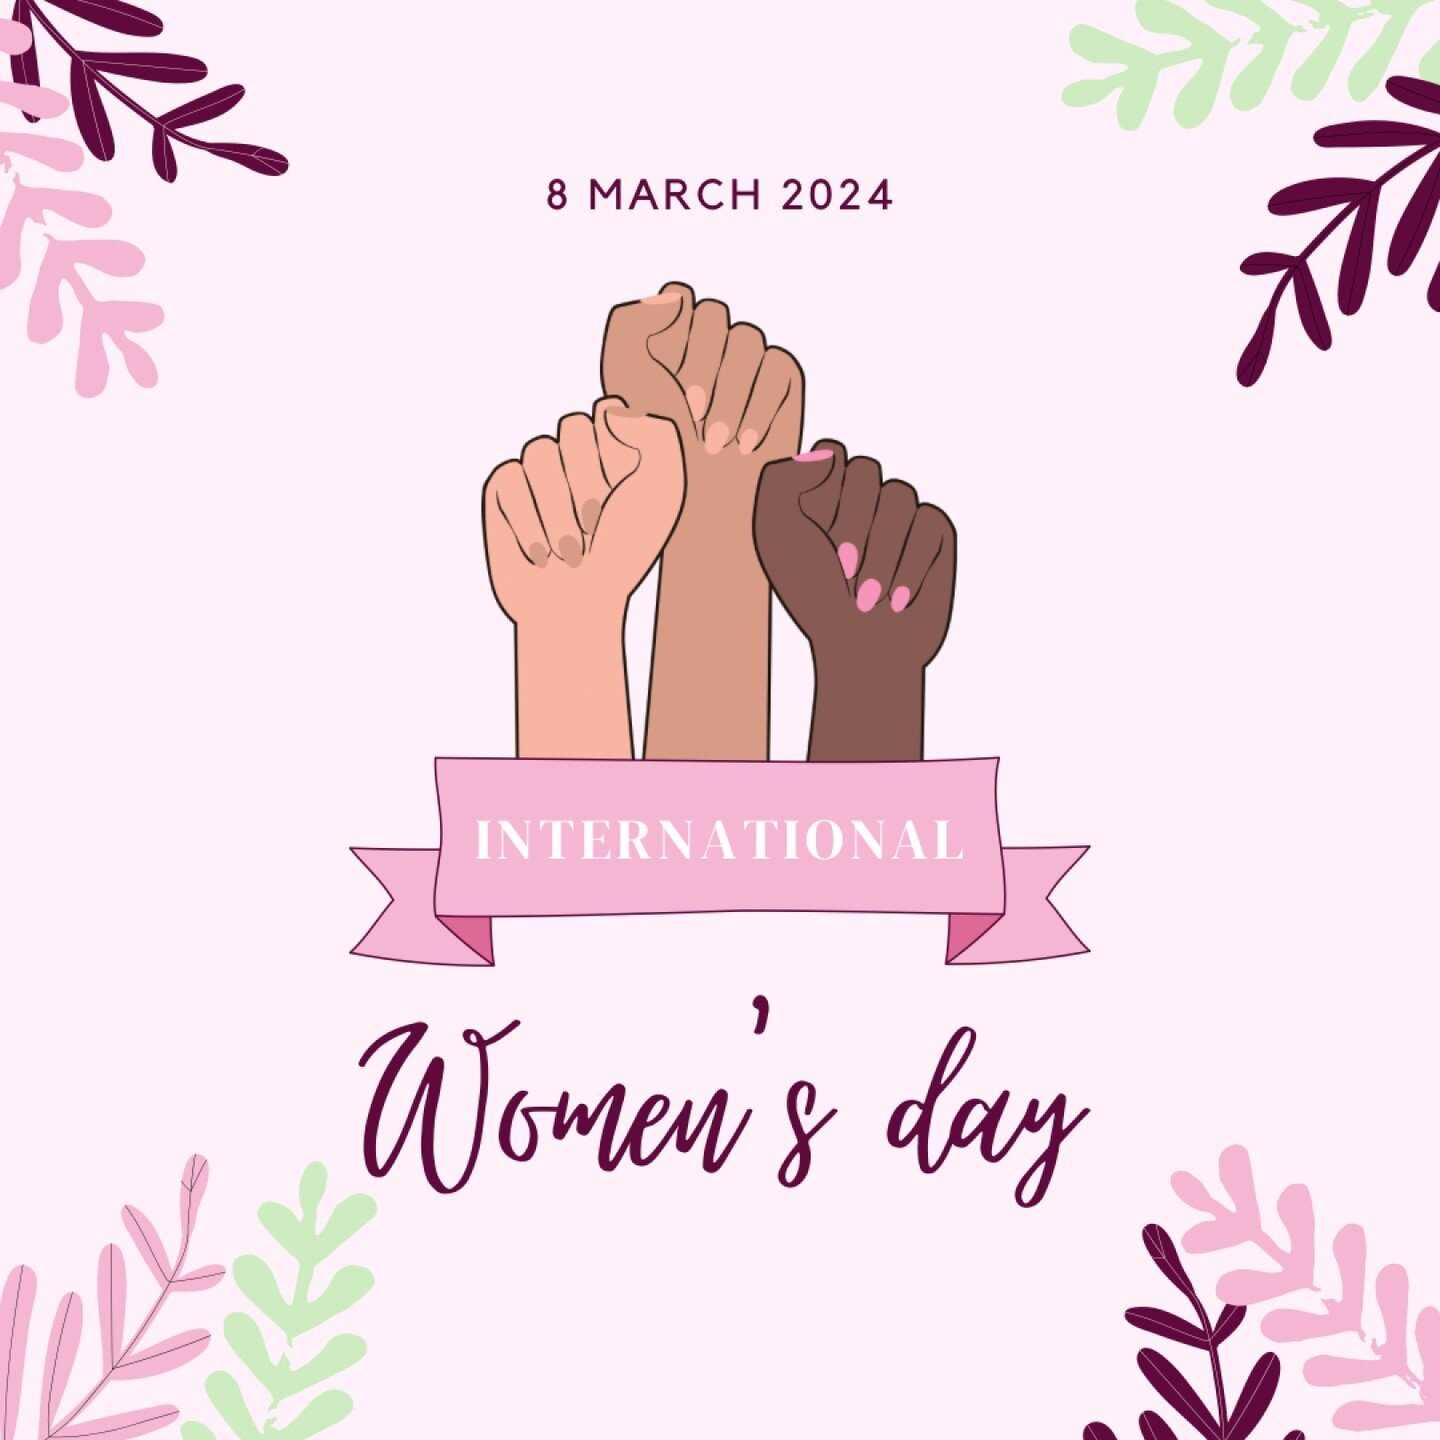 Happy International Women&rsquo;s day 2024! 

Imagine a gender equal world. A world free of bias, stereotypes, and discrimination. A world that's diverse, equitable, and inclusive. A world where difference is valued and celebrated. Together we can fo